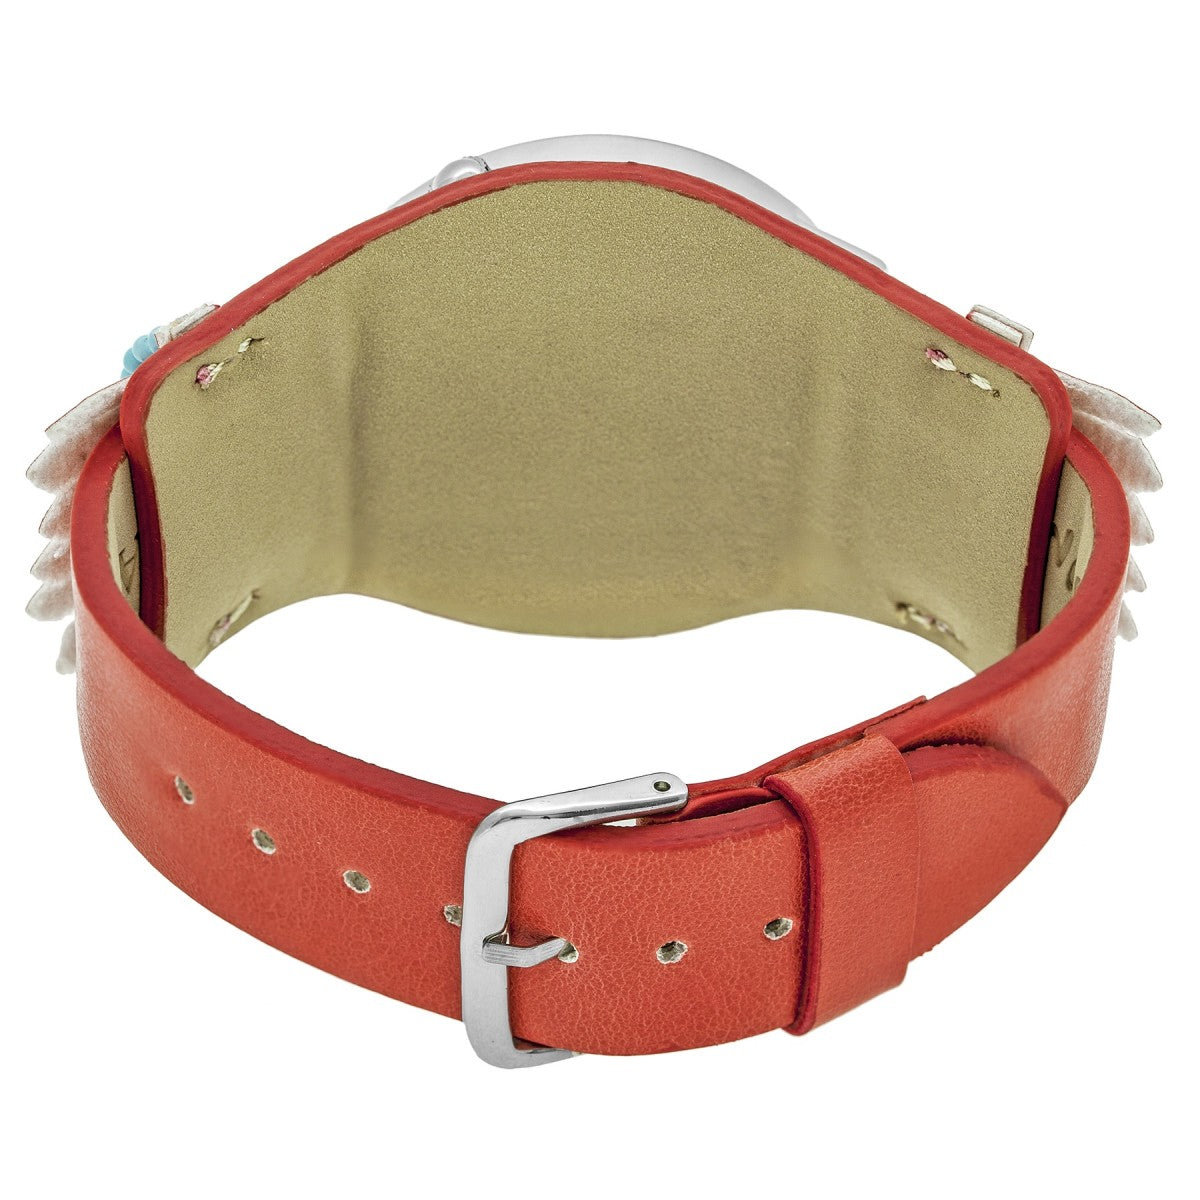 Boum Originaire Marbleizied-Dial Leather-Band Watch w/ Fringed Sheath - Silver/Red - BOUBM4001